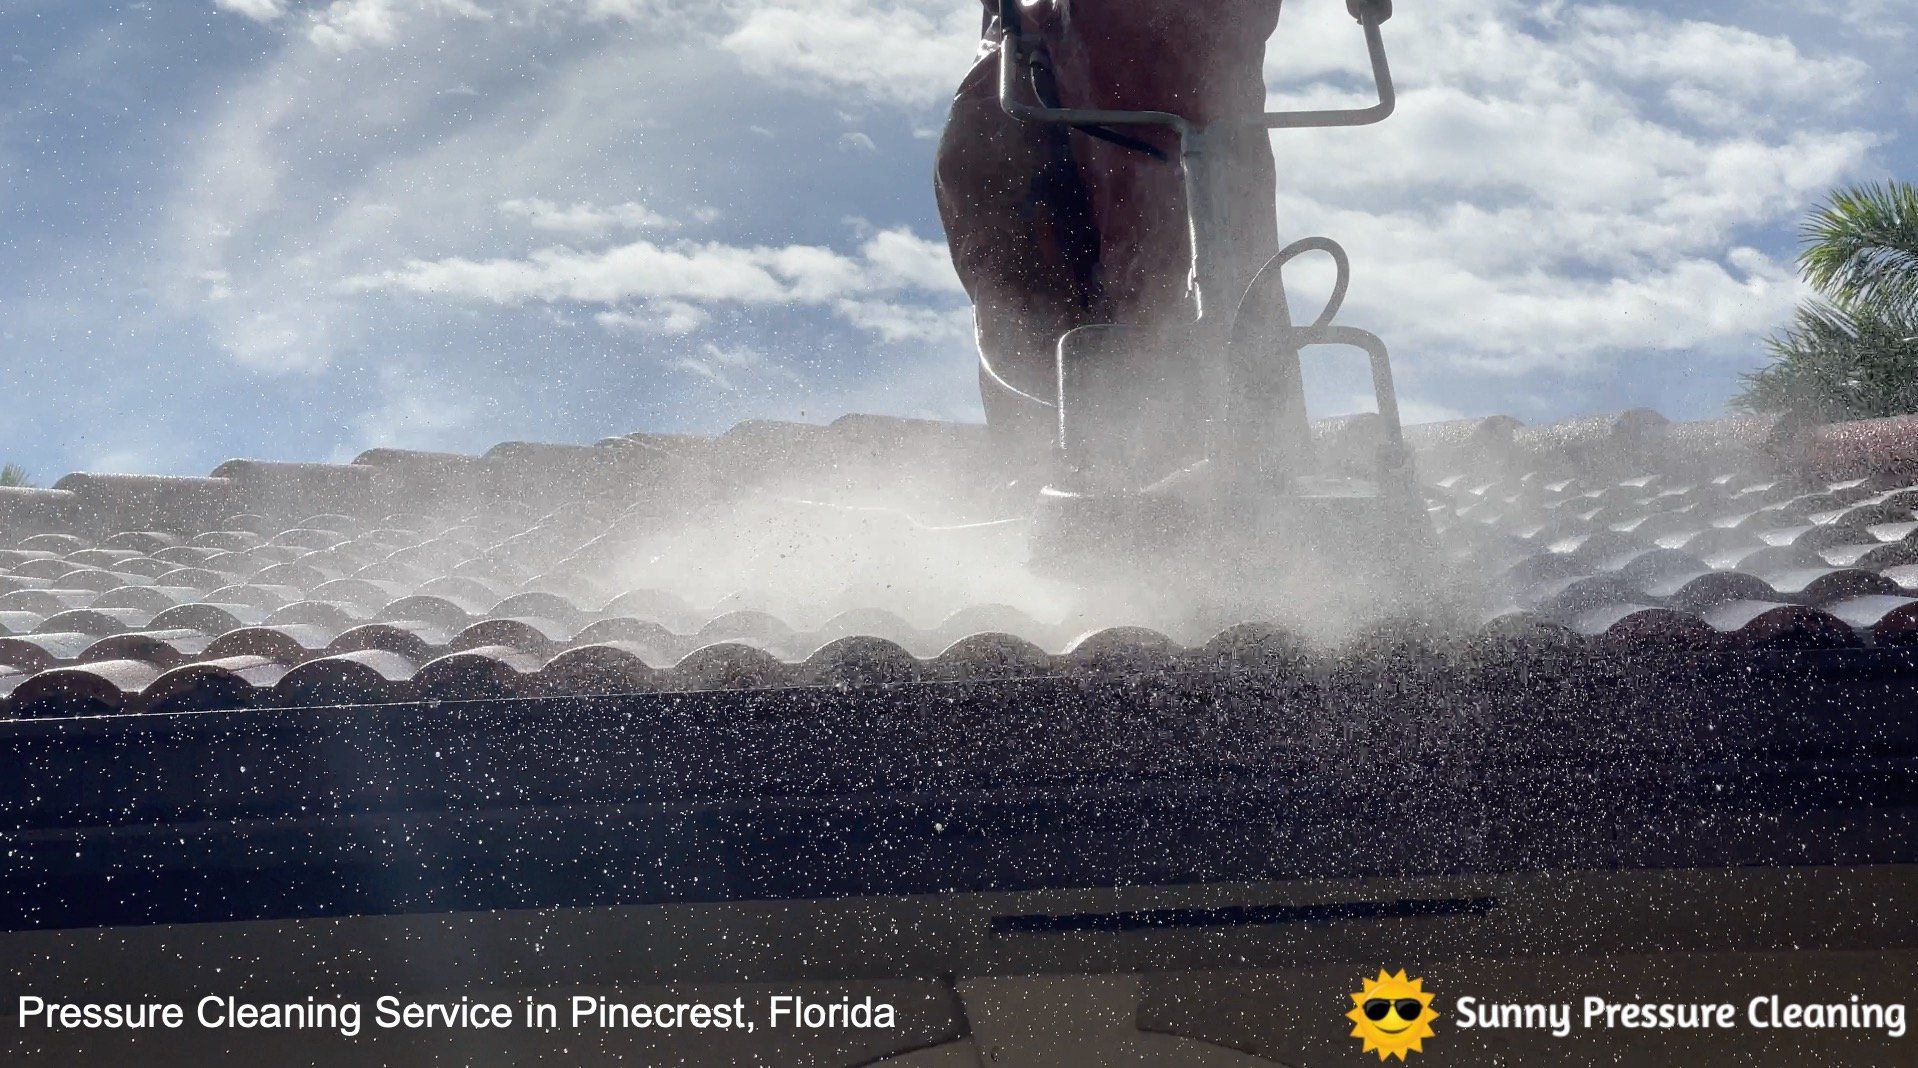 pressure cleaning service in Pinecrest, Florida by Sunny Pressure Cleaning Pinecrest